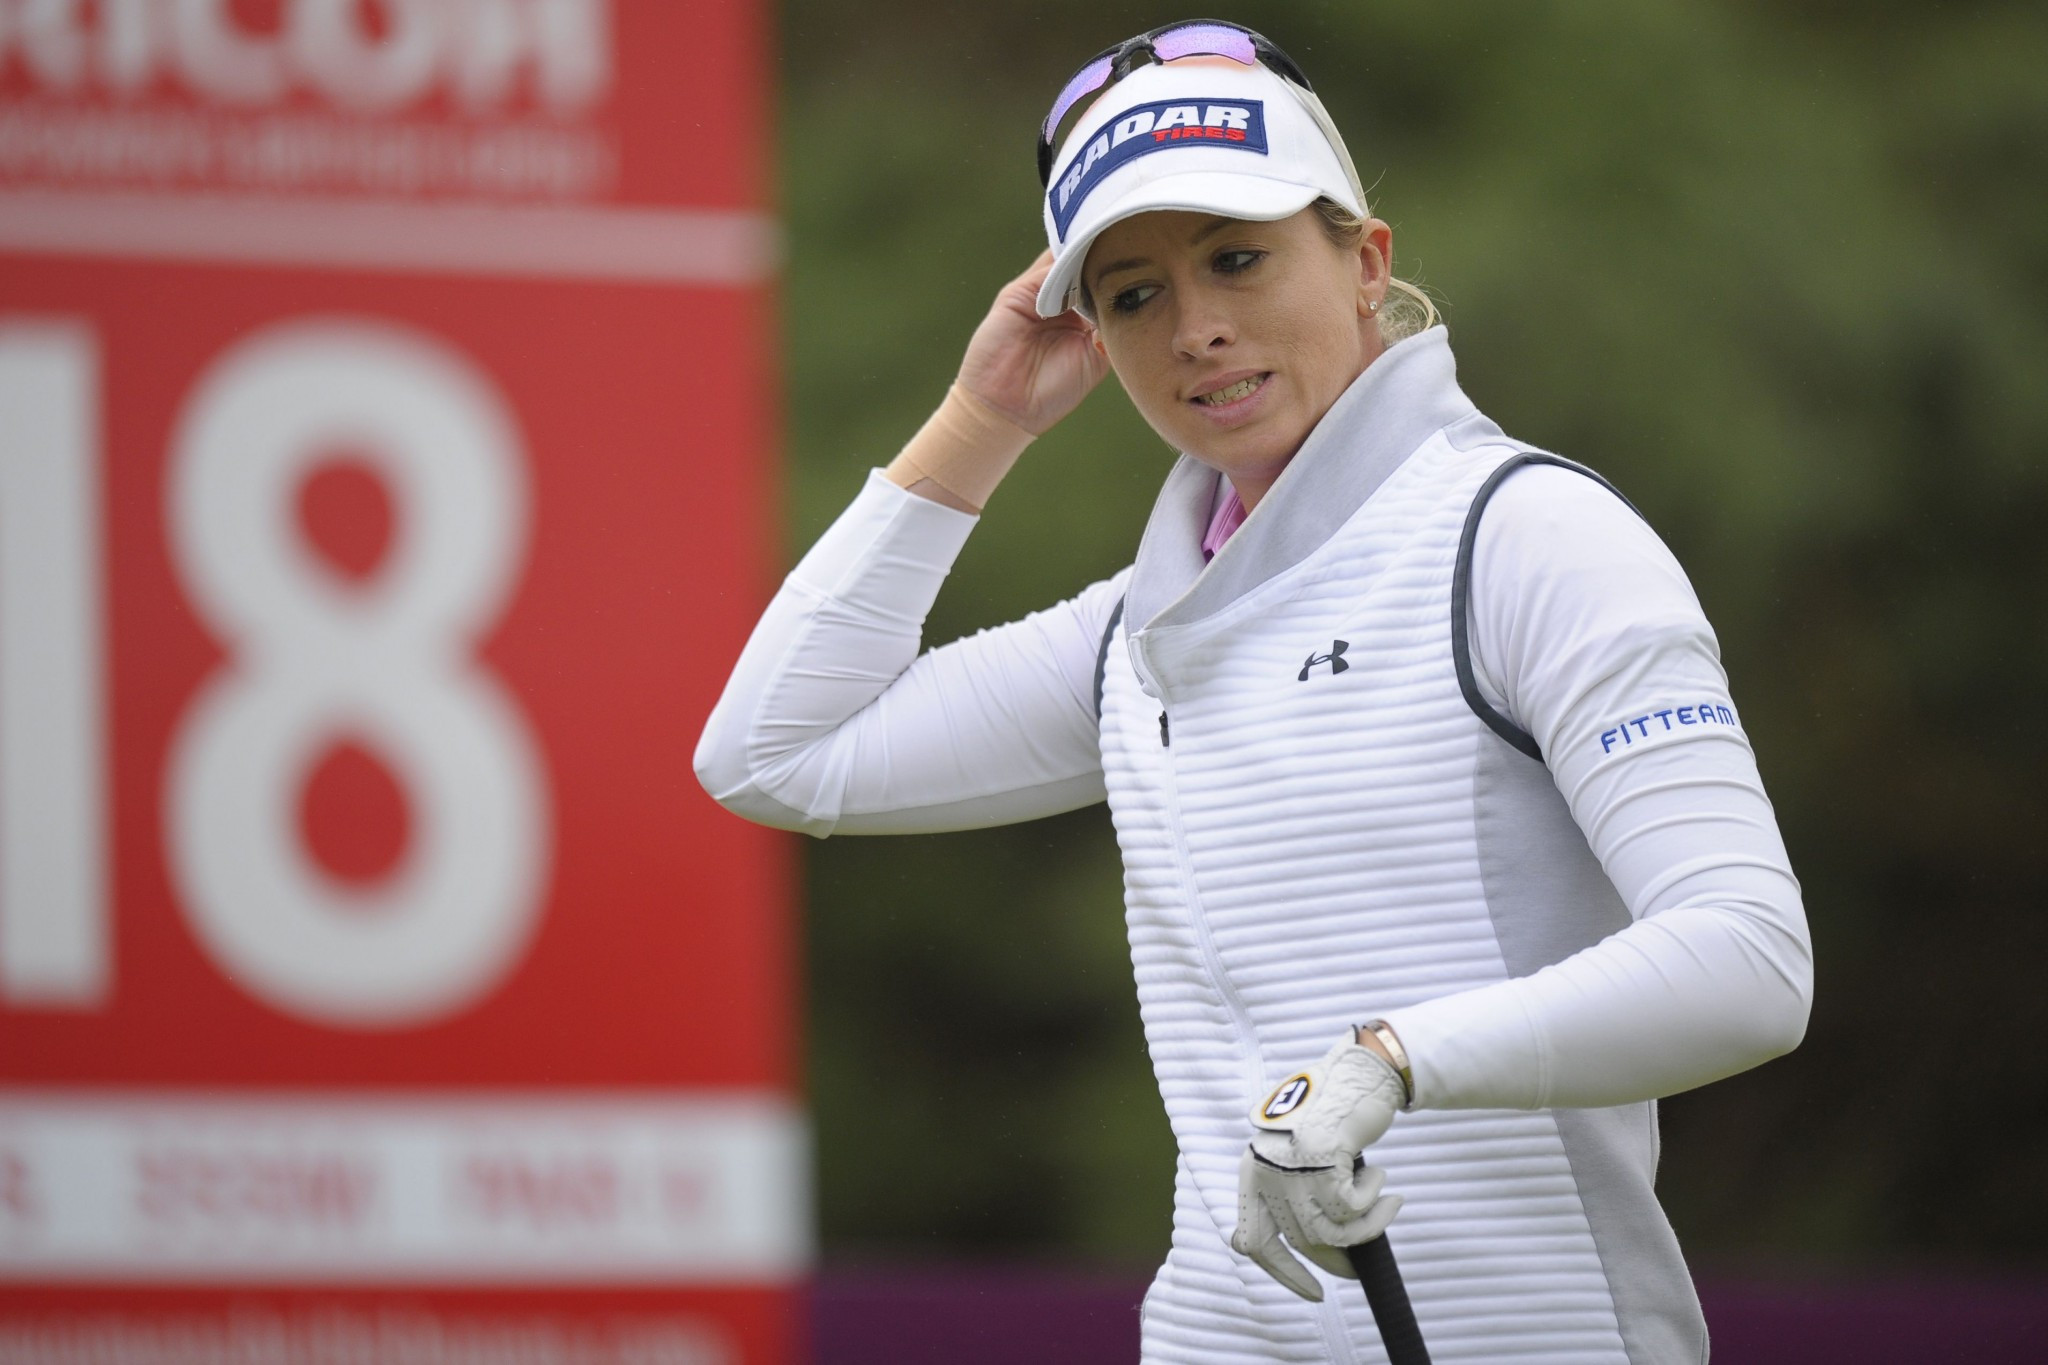 England's Jodie Ewart Shadoff equalled the course record to end two shots behind the winner ©Getty Images